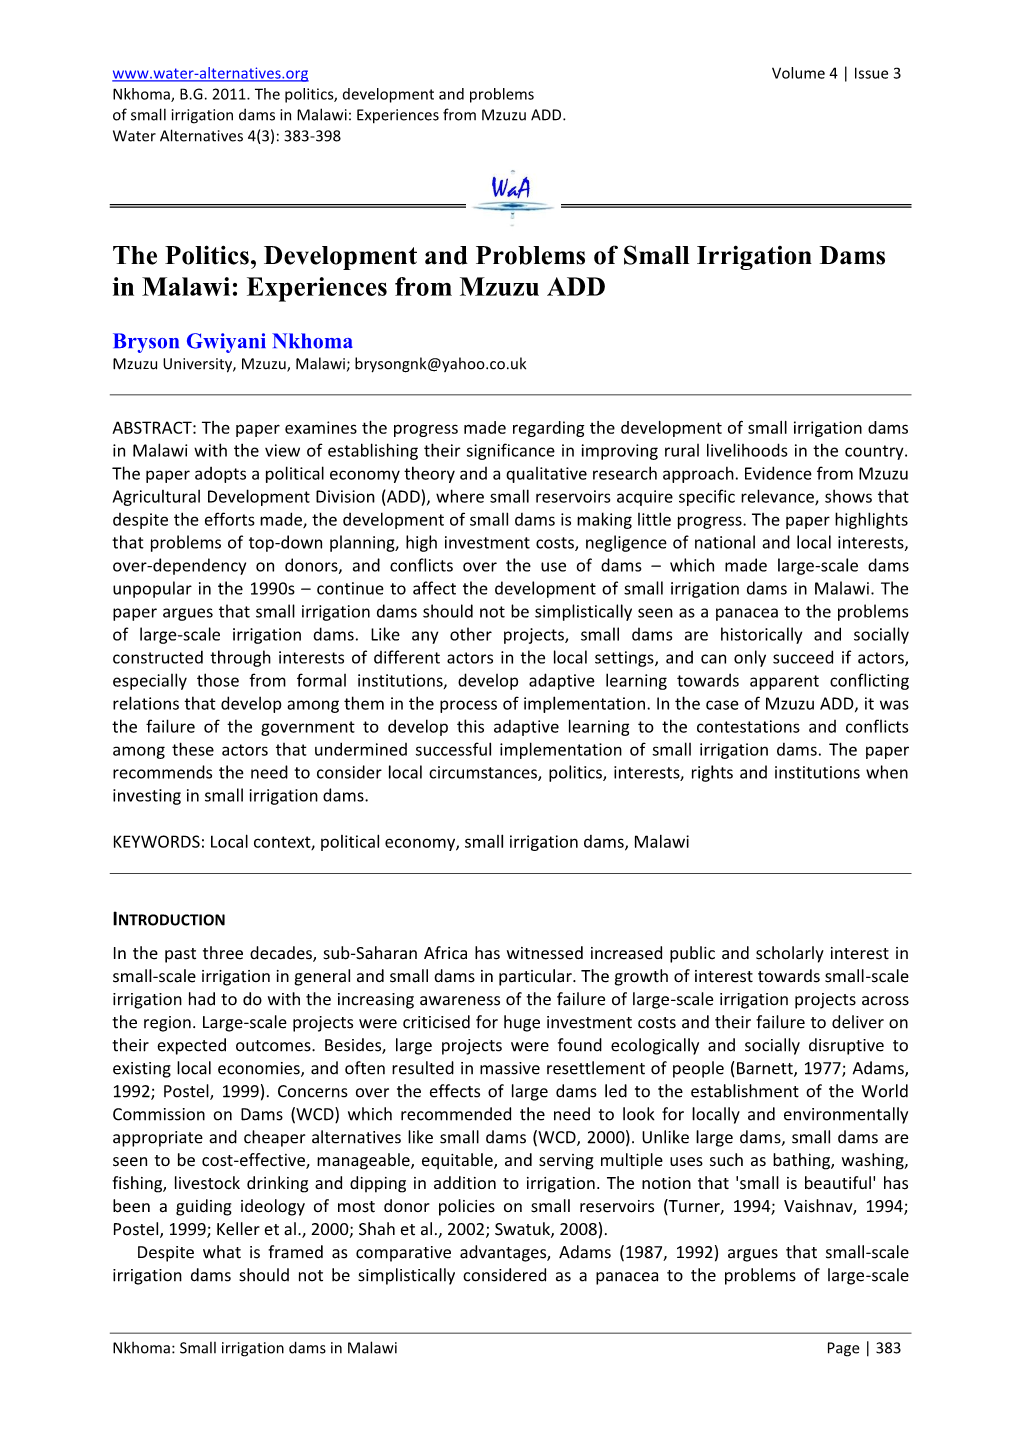 The Politics, Development and Problems of Small Irrigation Dams in Malawi: Experiences from Mzuzu ADD